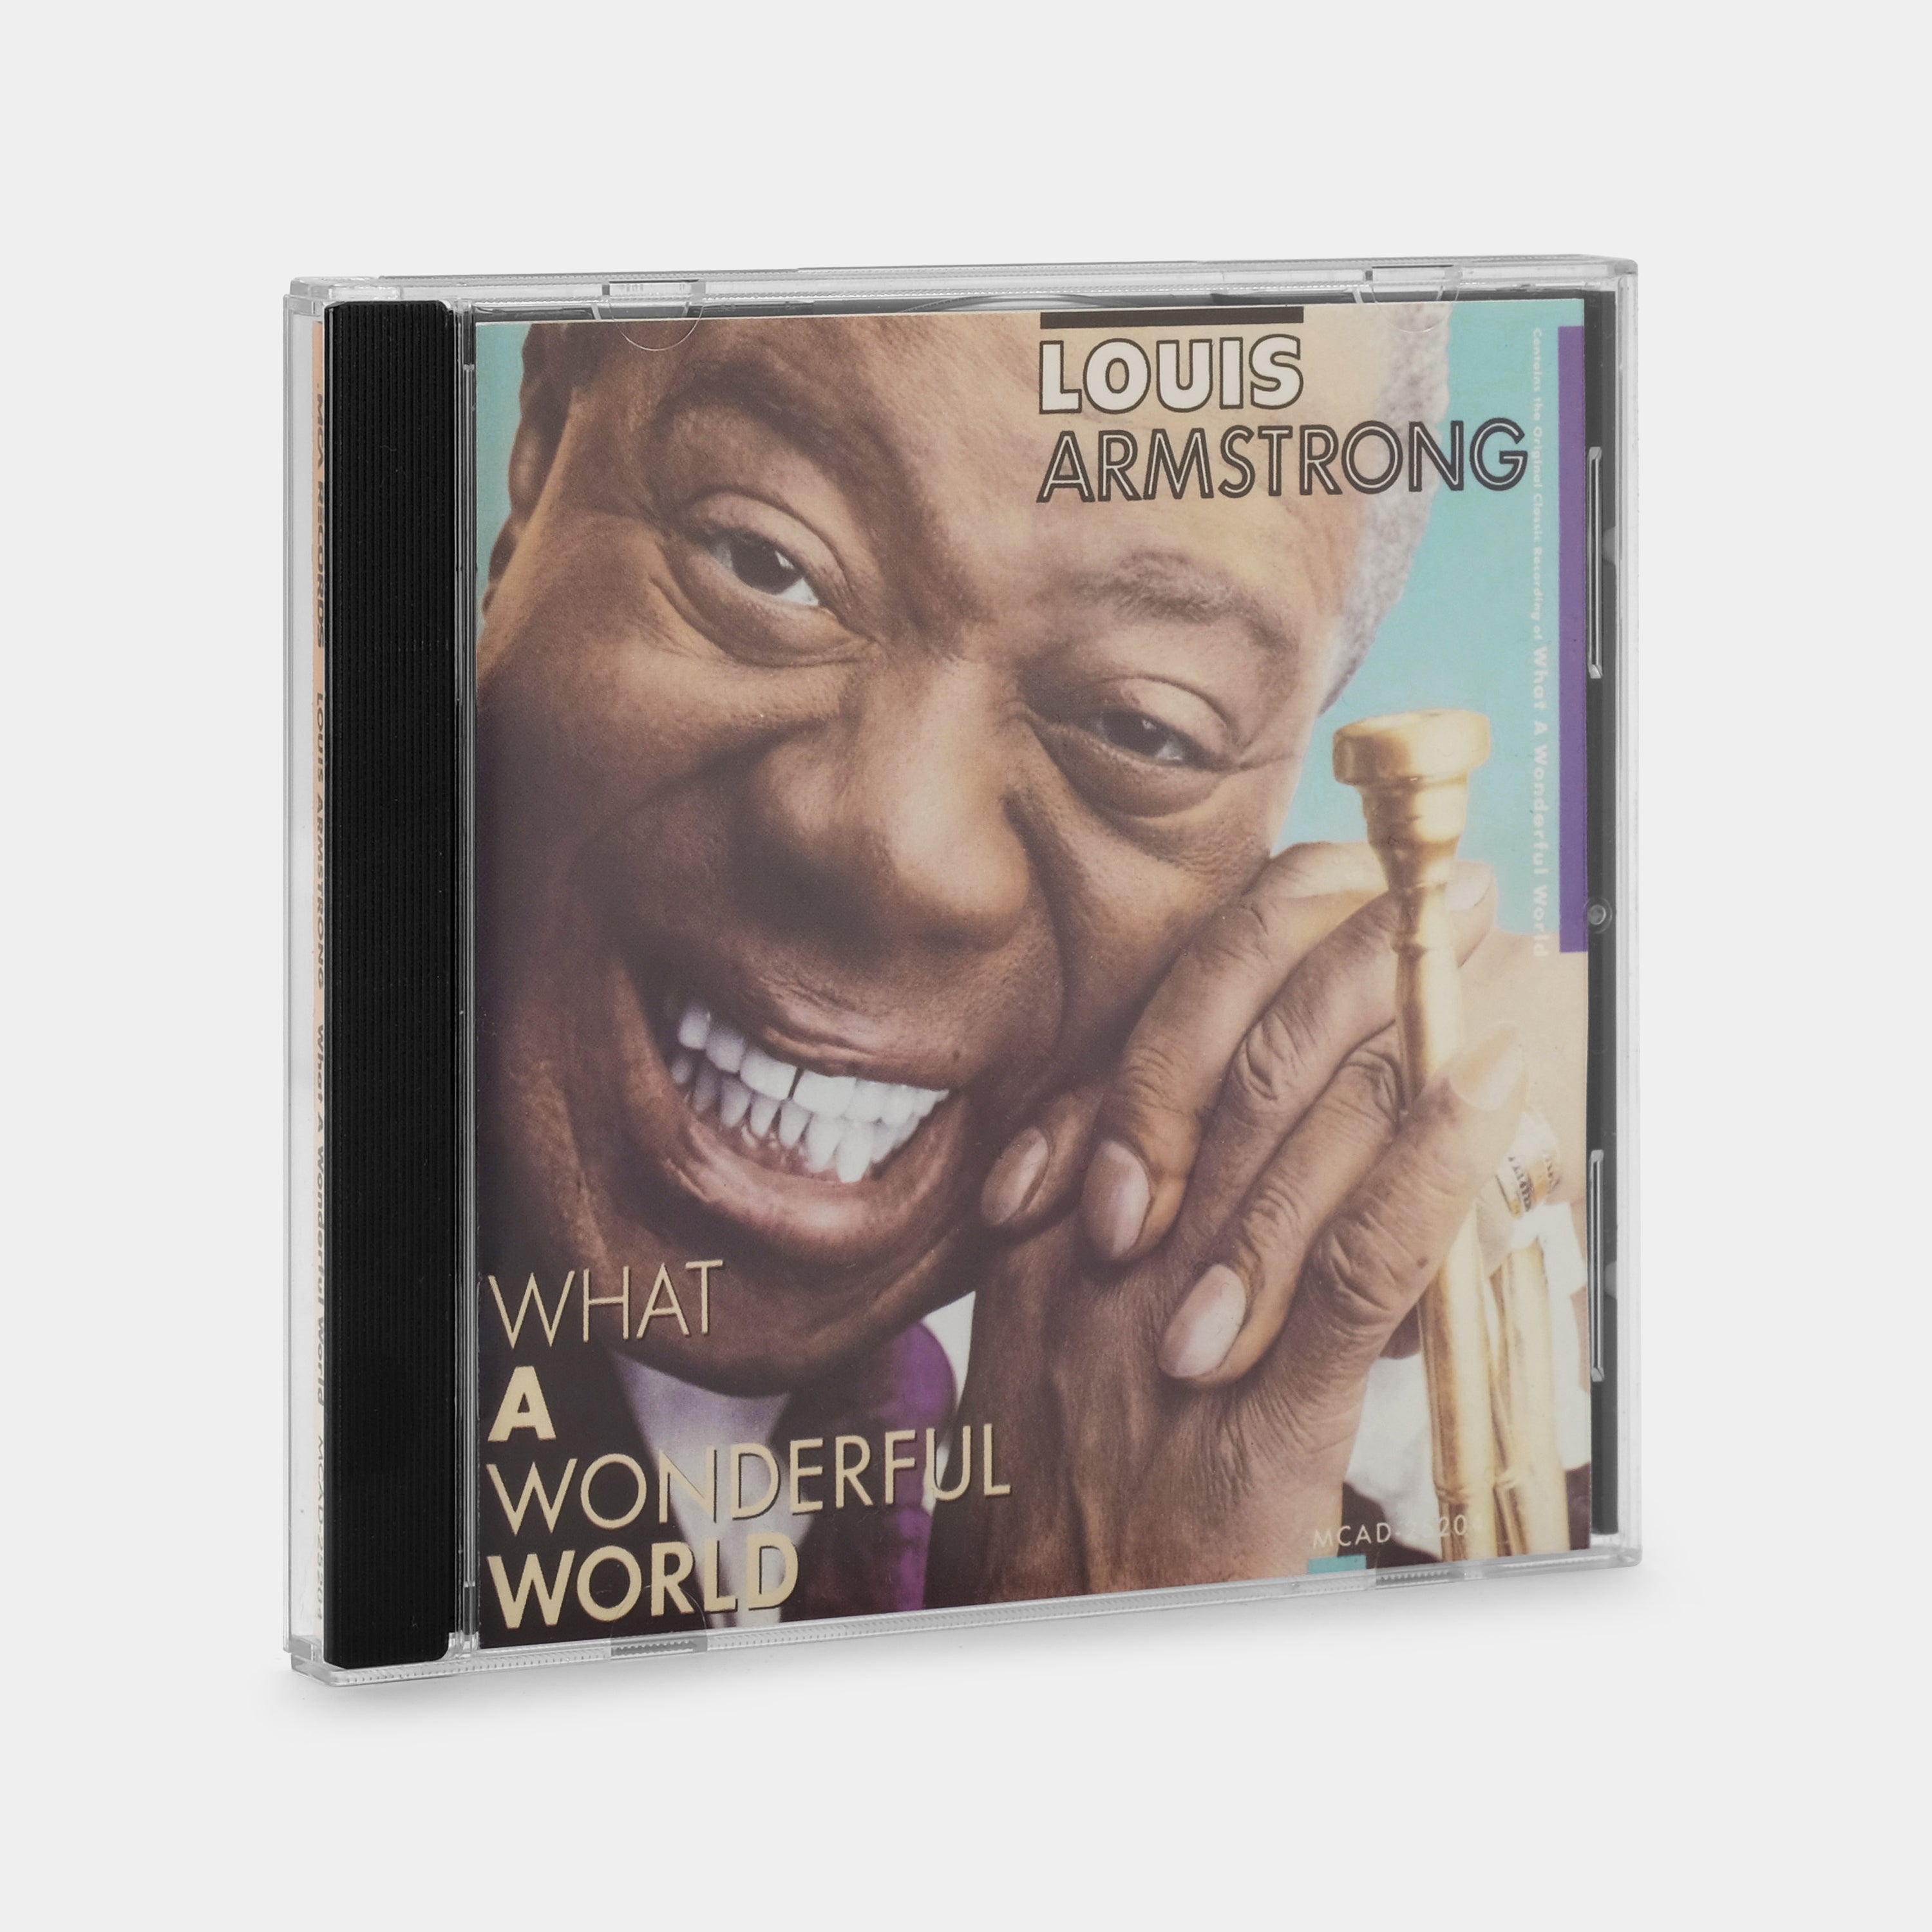 Louis Armstrong - What A Wonderful World CD